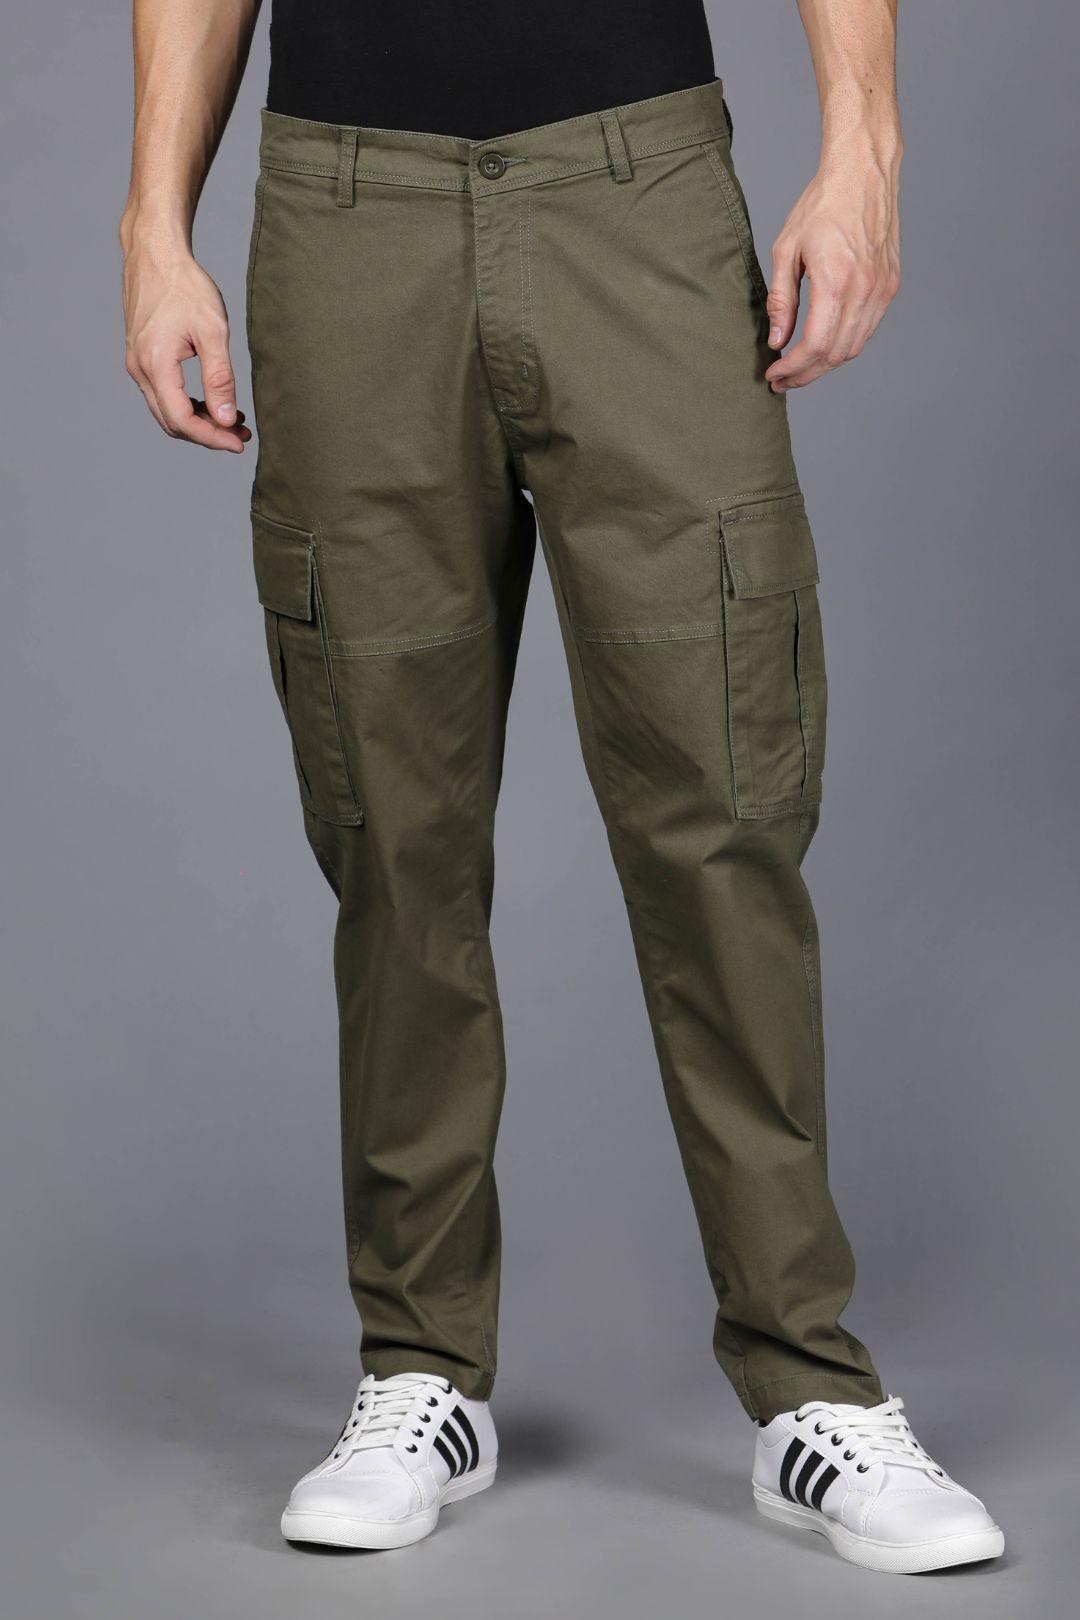 Burgoyne Mens Cotton Solids Stretchable Unstitched Trouser Fabric Dark  Olive Green